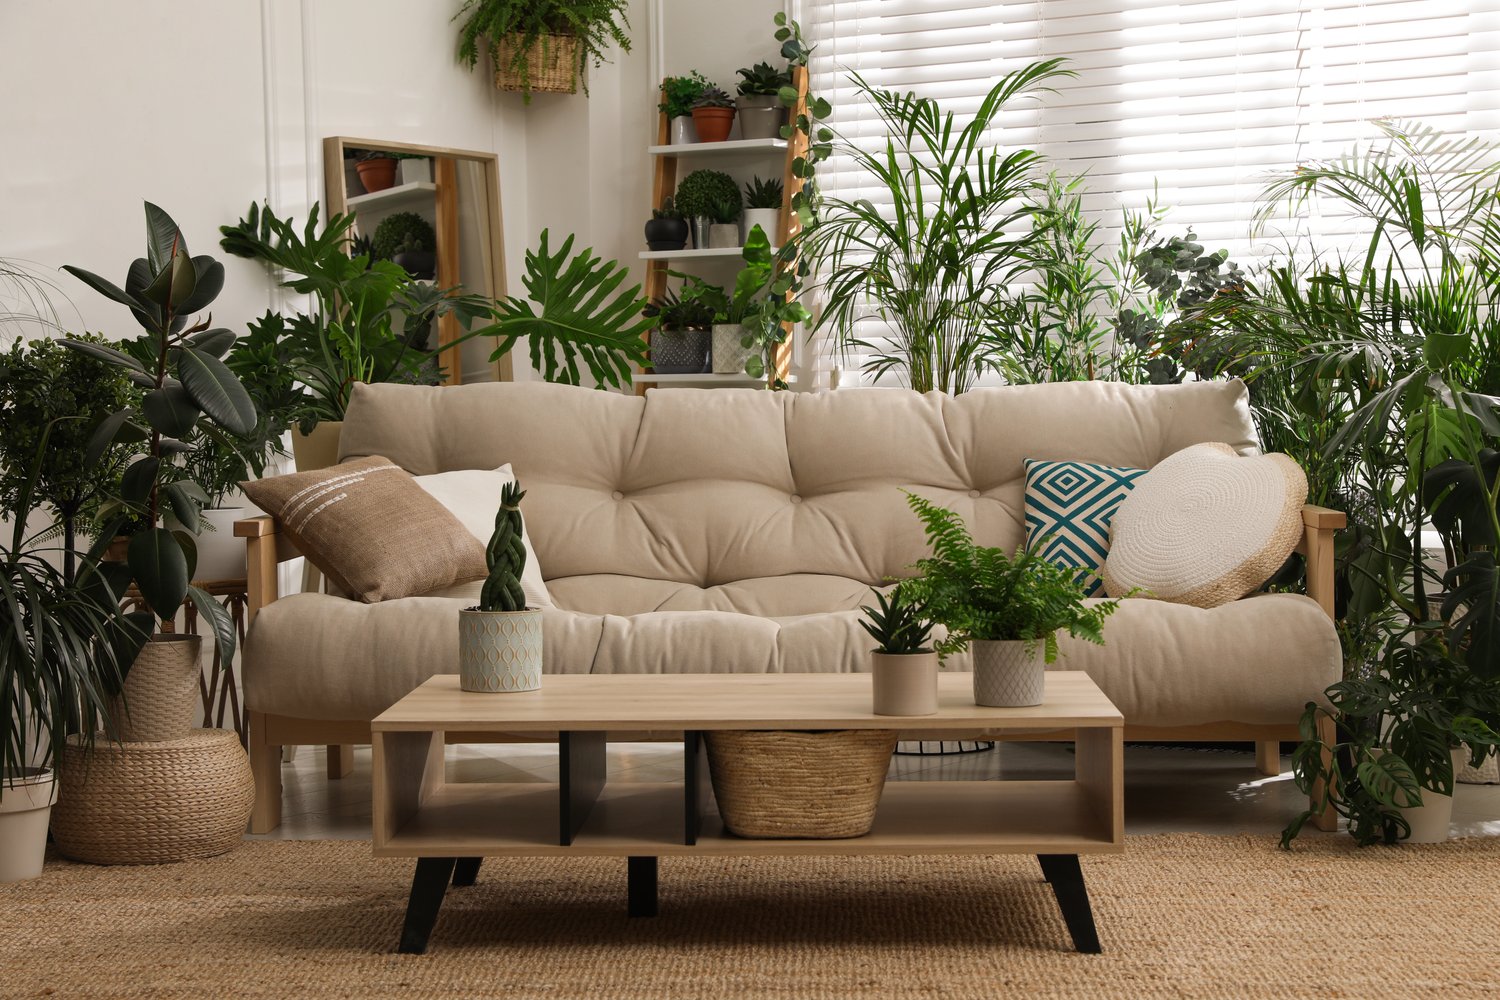 Photo of stylish room interior with comfortable sofa and beautiful potted plants. Lounge zone